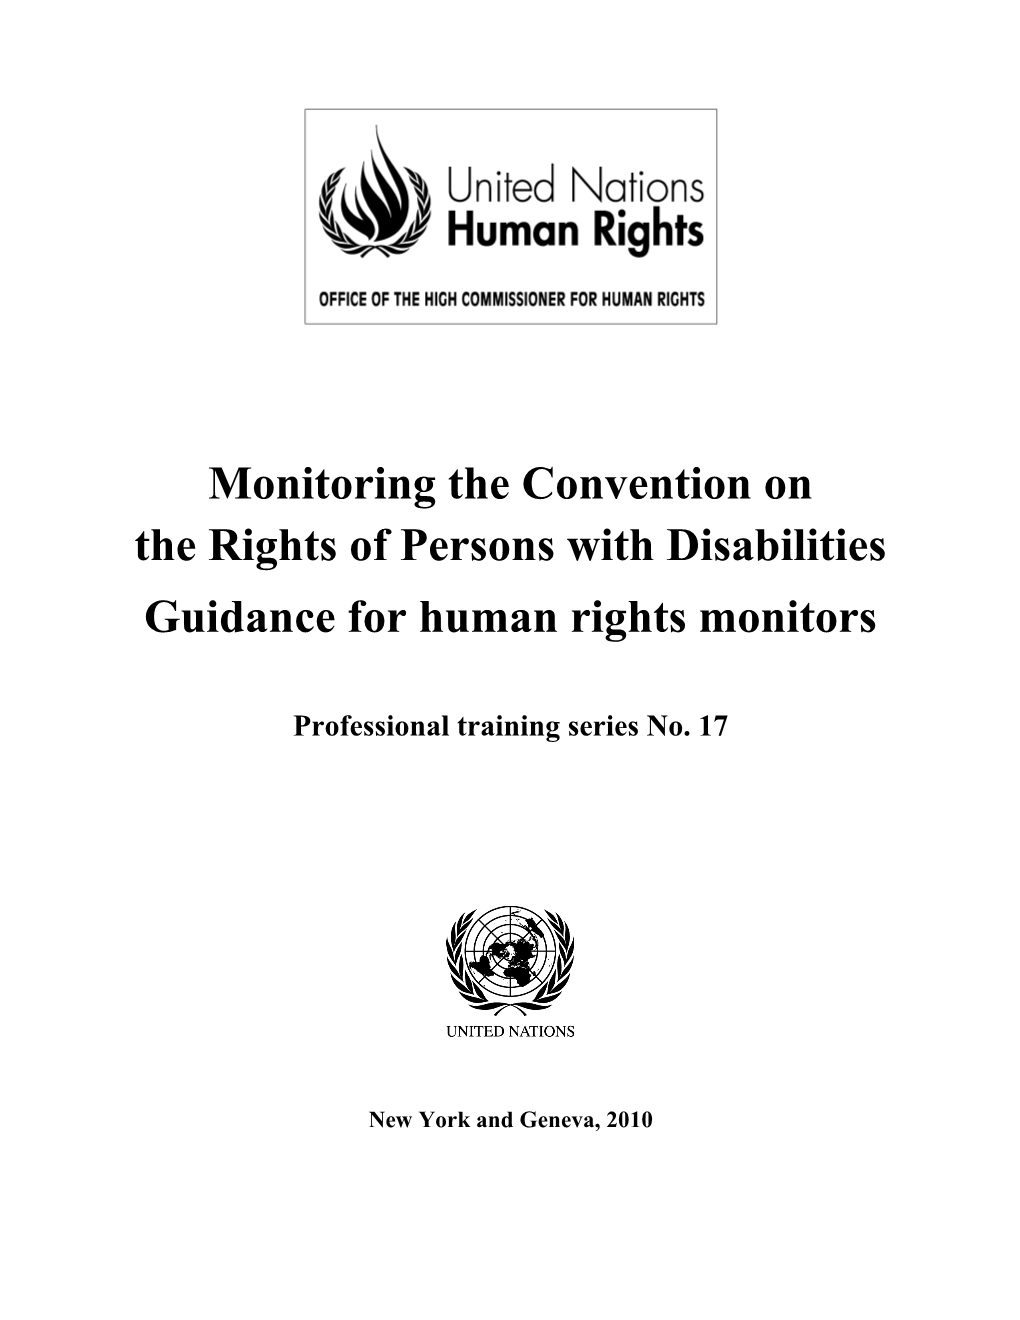 Guidance for Human Rights Monitors